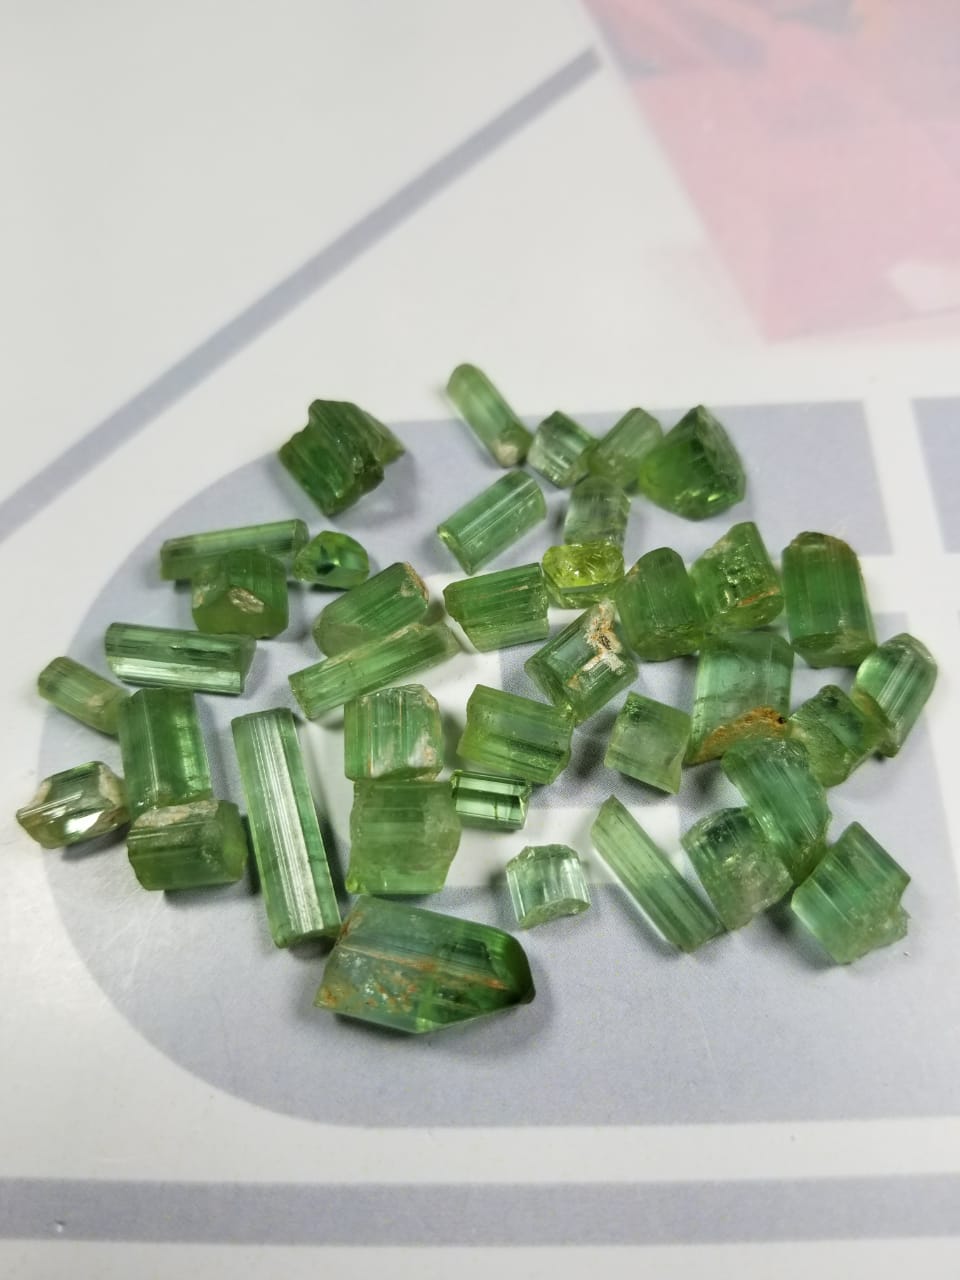 Facet Rough Green Tourmaline from the mines of Jaba Kuna